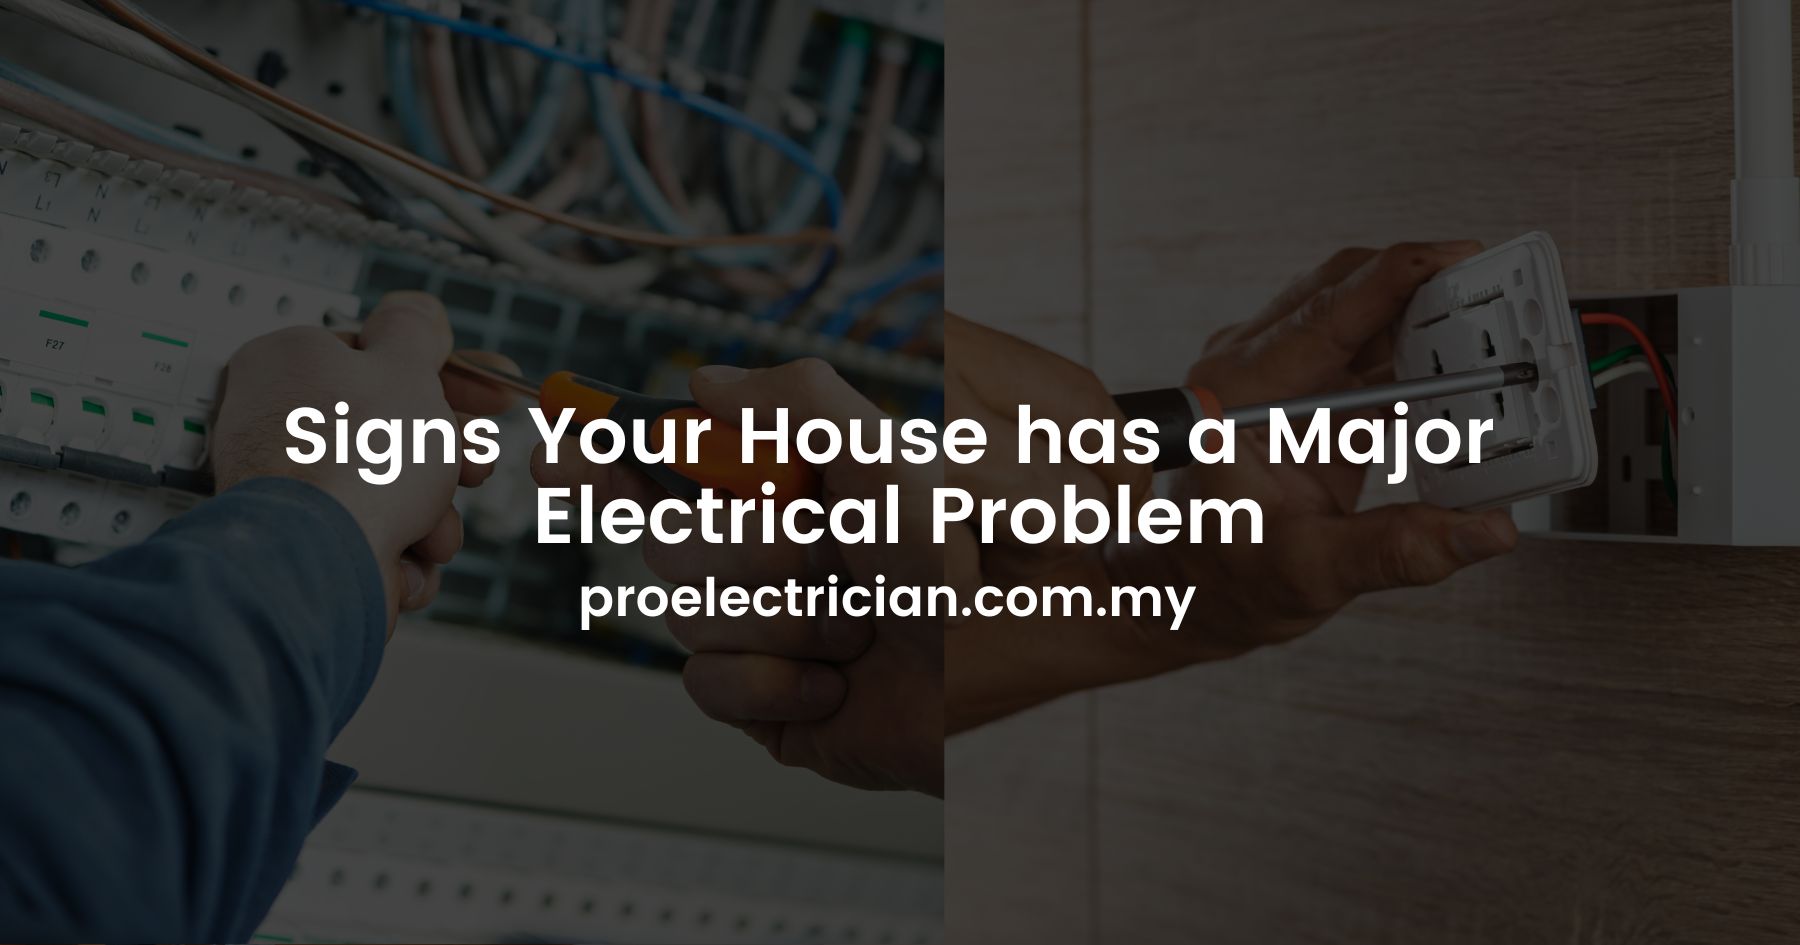 Signs Your House has a Major Electrical Problem